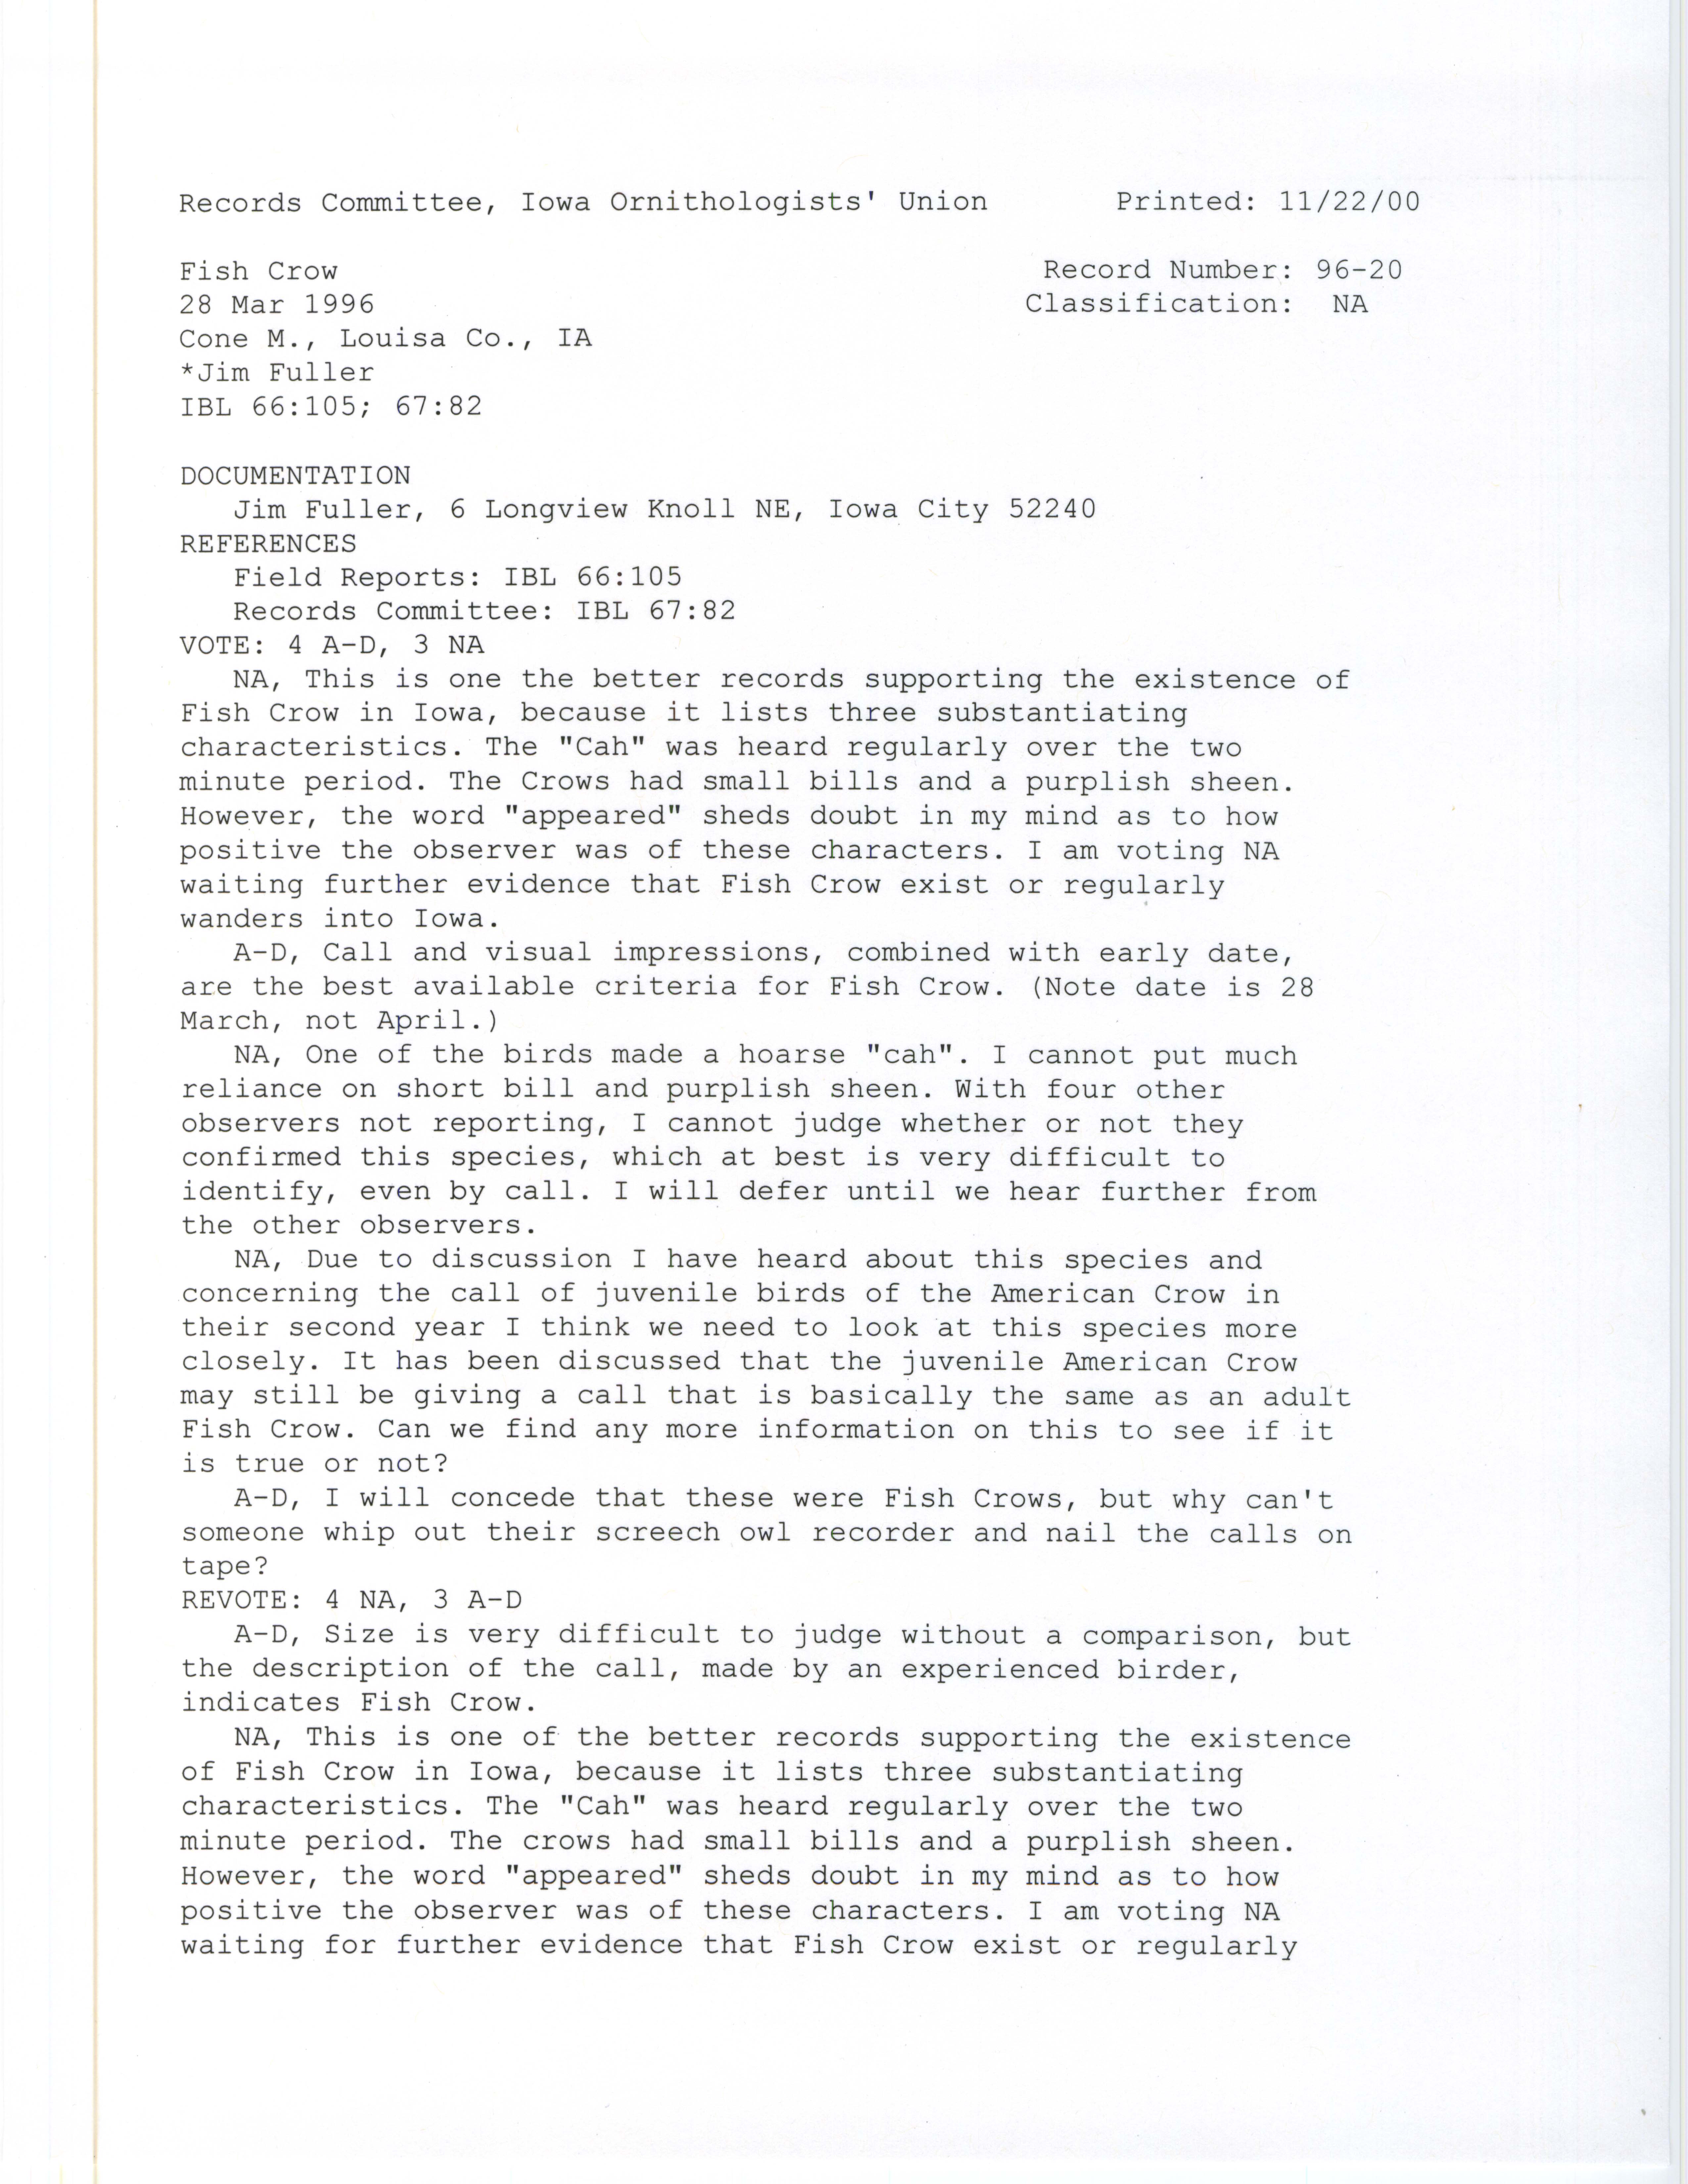 Records Committee review for rare bird sighting for Fish Crow at Cone Marsh, 1996